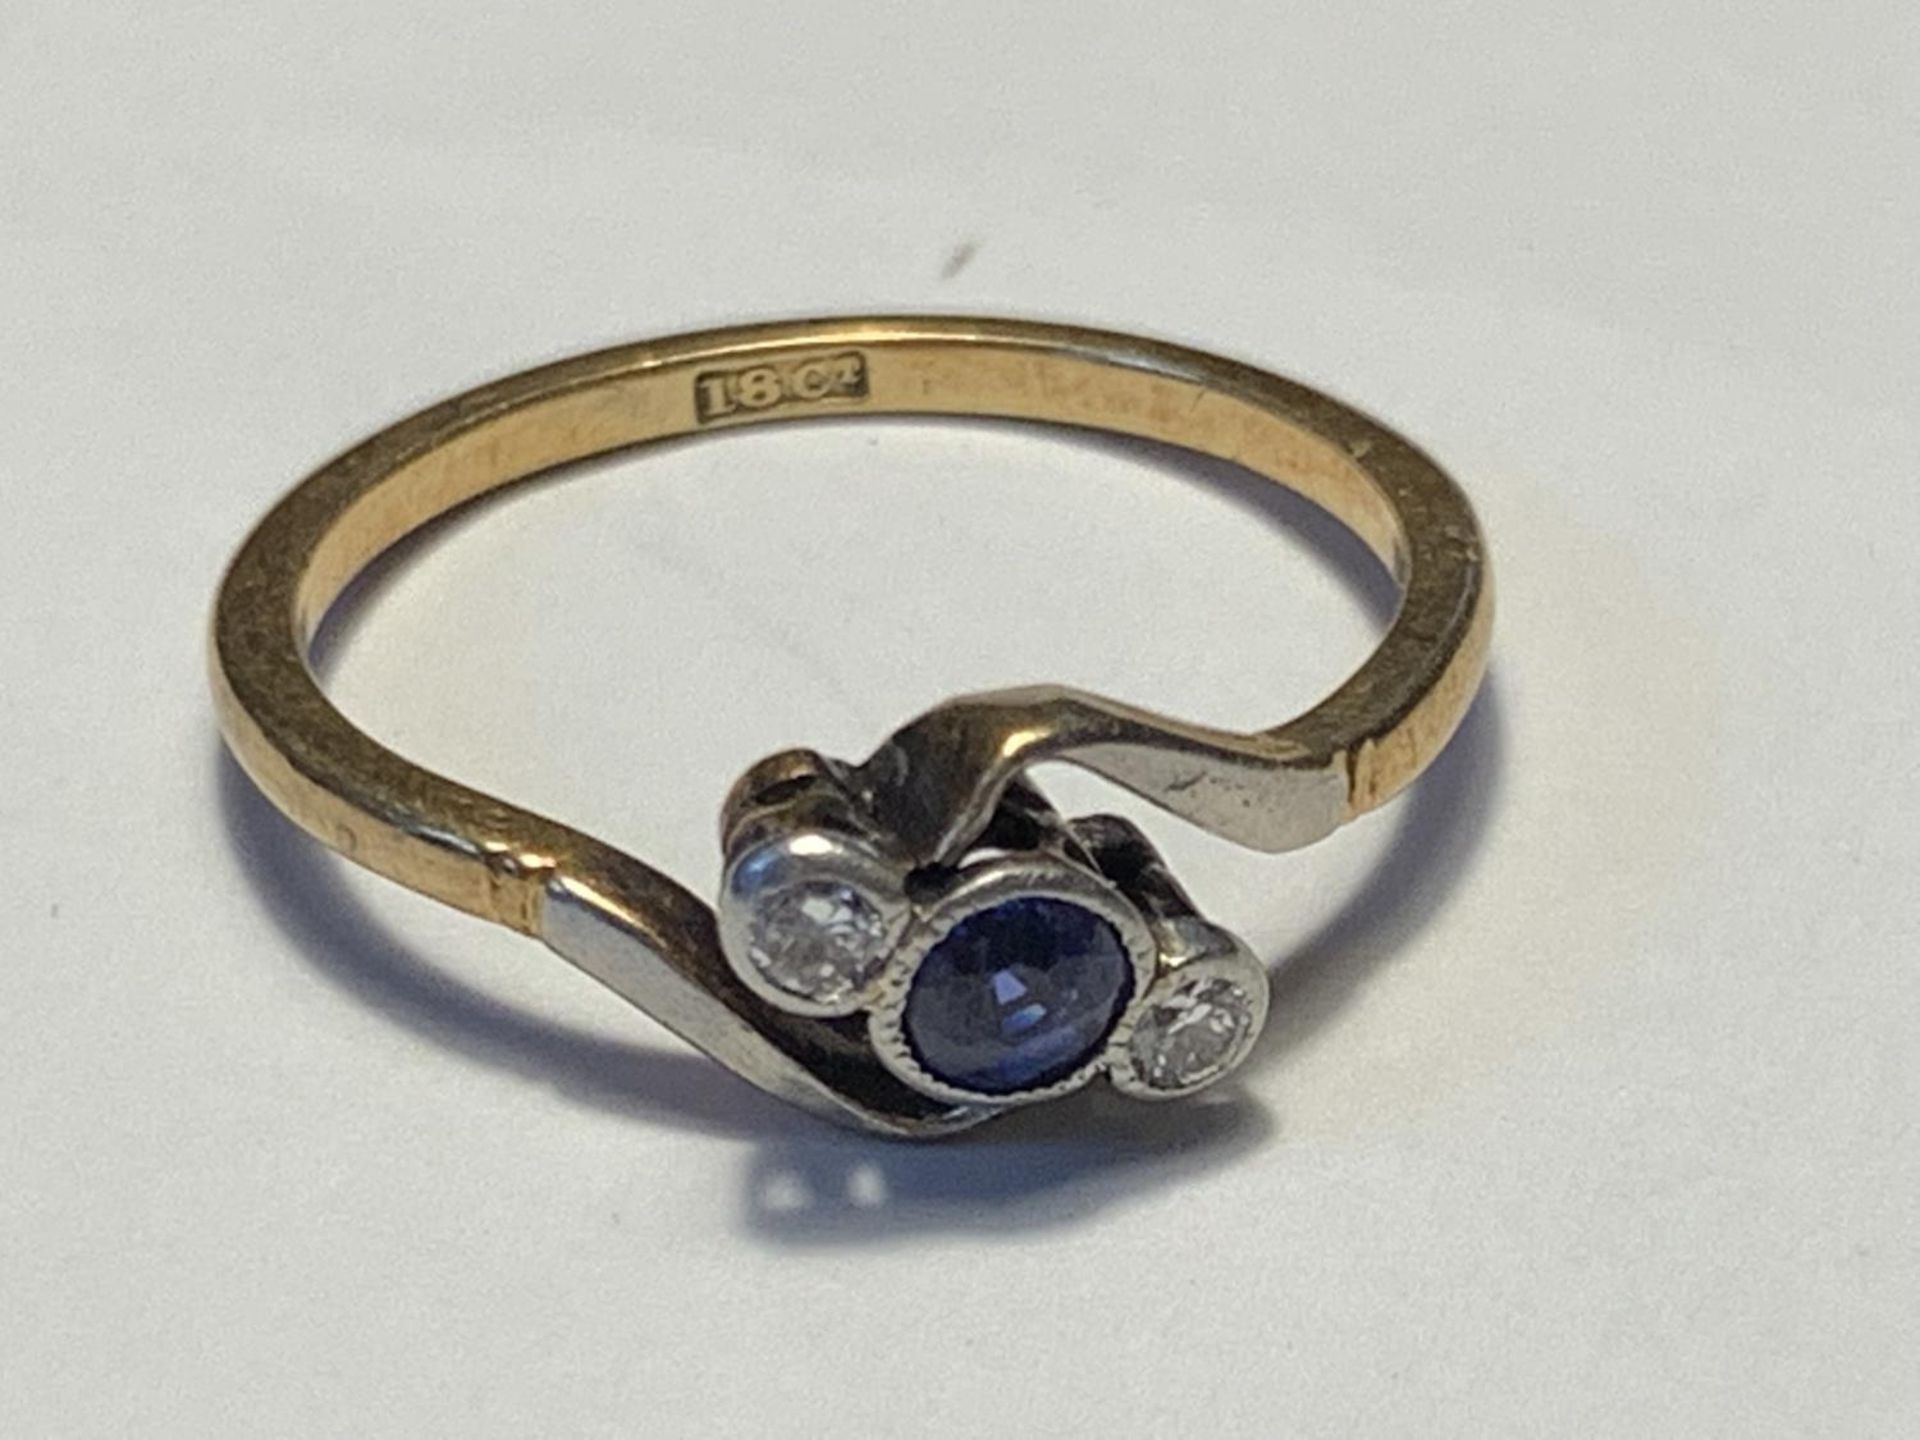 AN 18 CARAT GOD RING WITH A CENTRE SAPPHIRE AND A DIAMOND EACH SIDE ON A TWIST DESIGN SIZE K/L GROSS